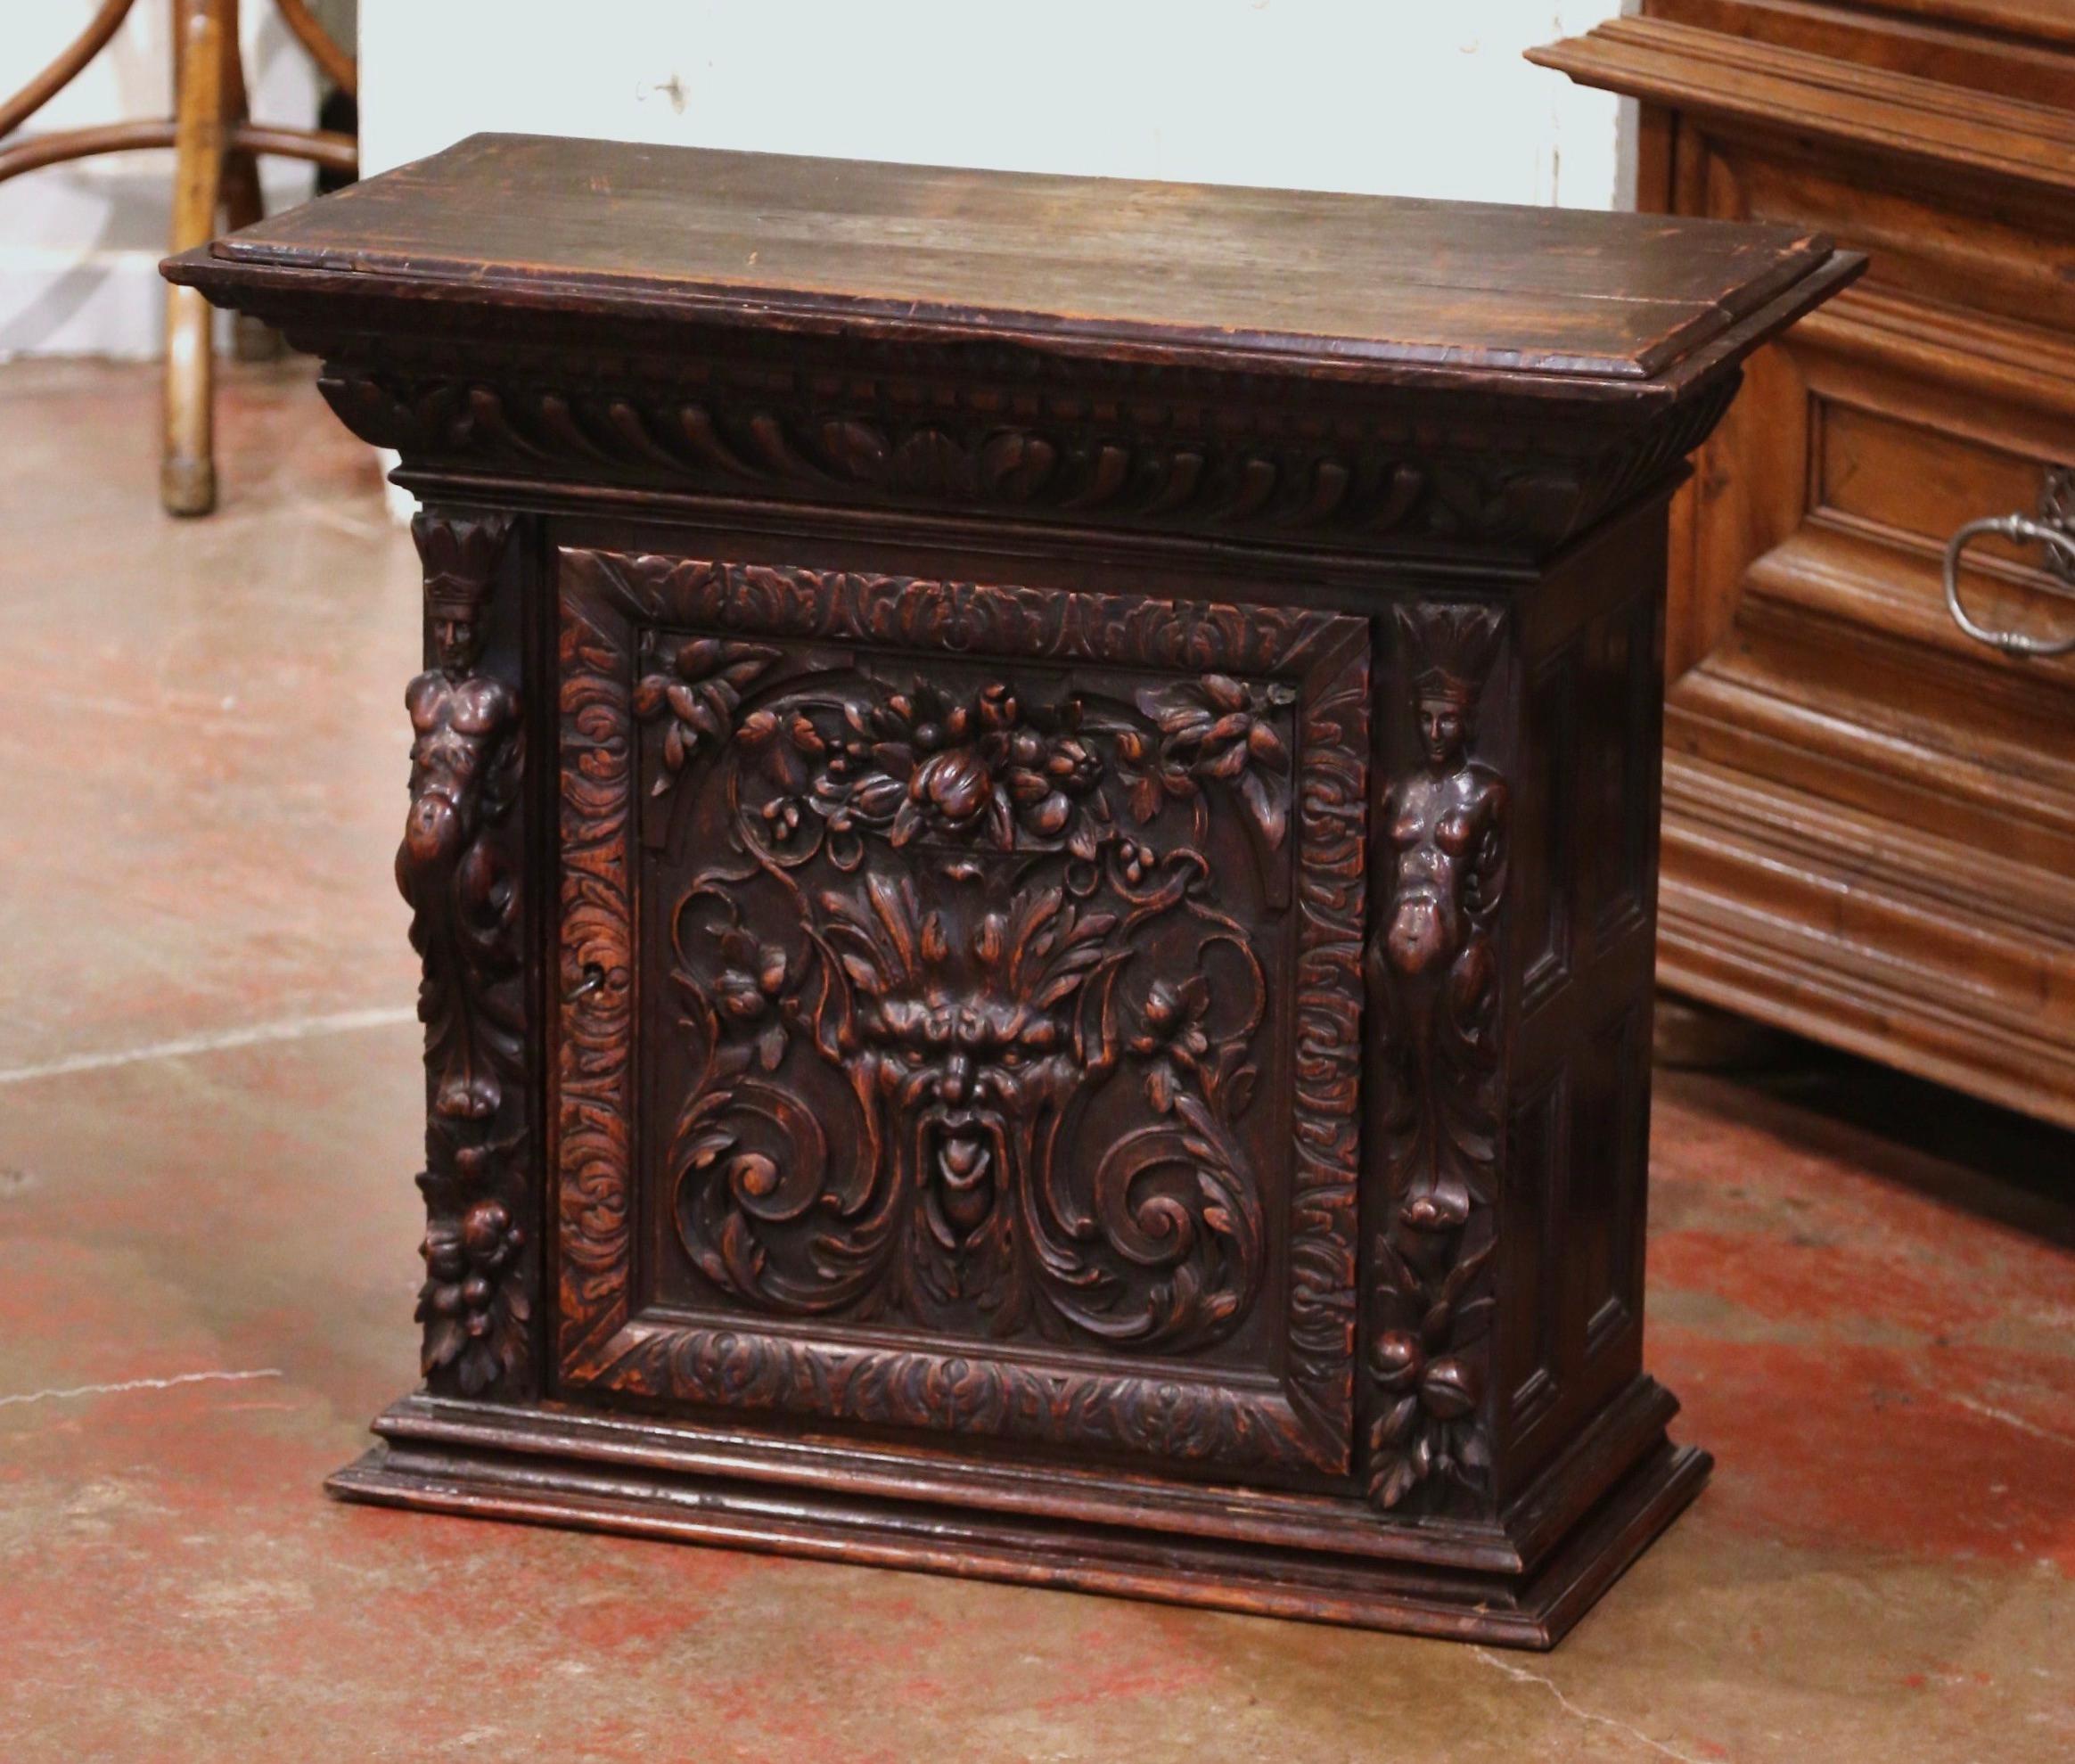 Hand-Carved 18th Century Italian Renaissance Carved Walnut Wall Hanging Cabinet